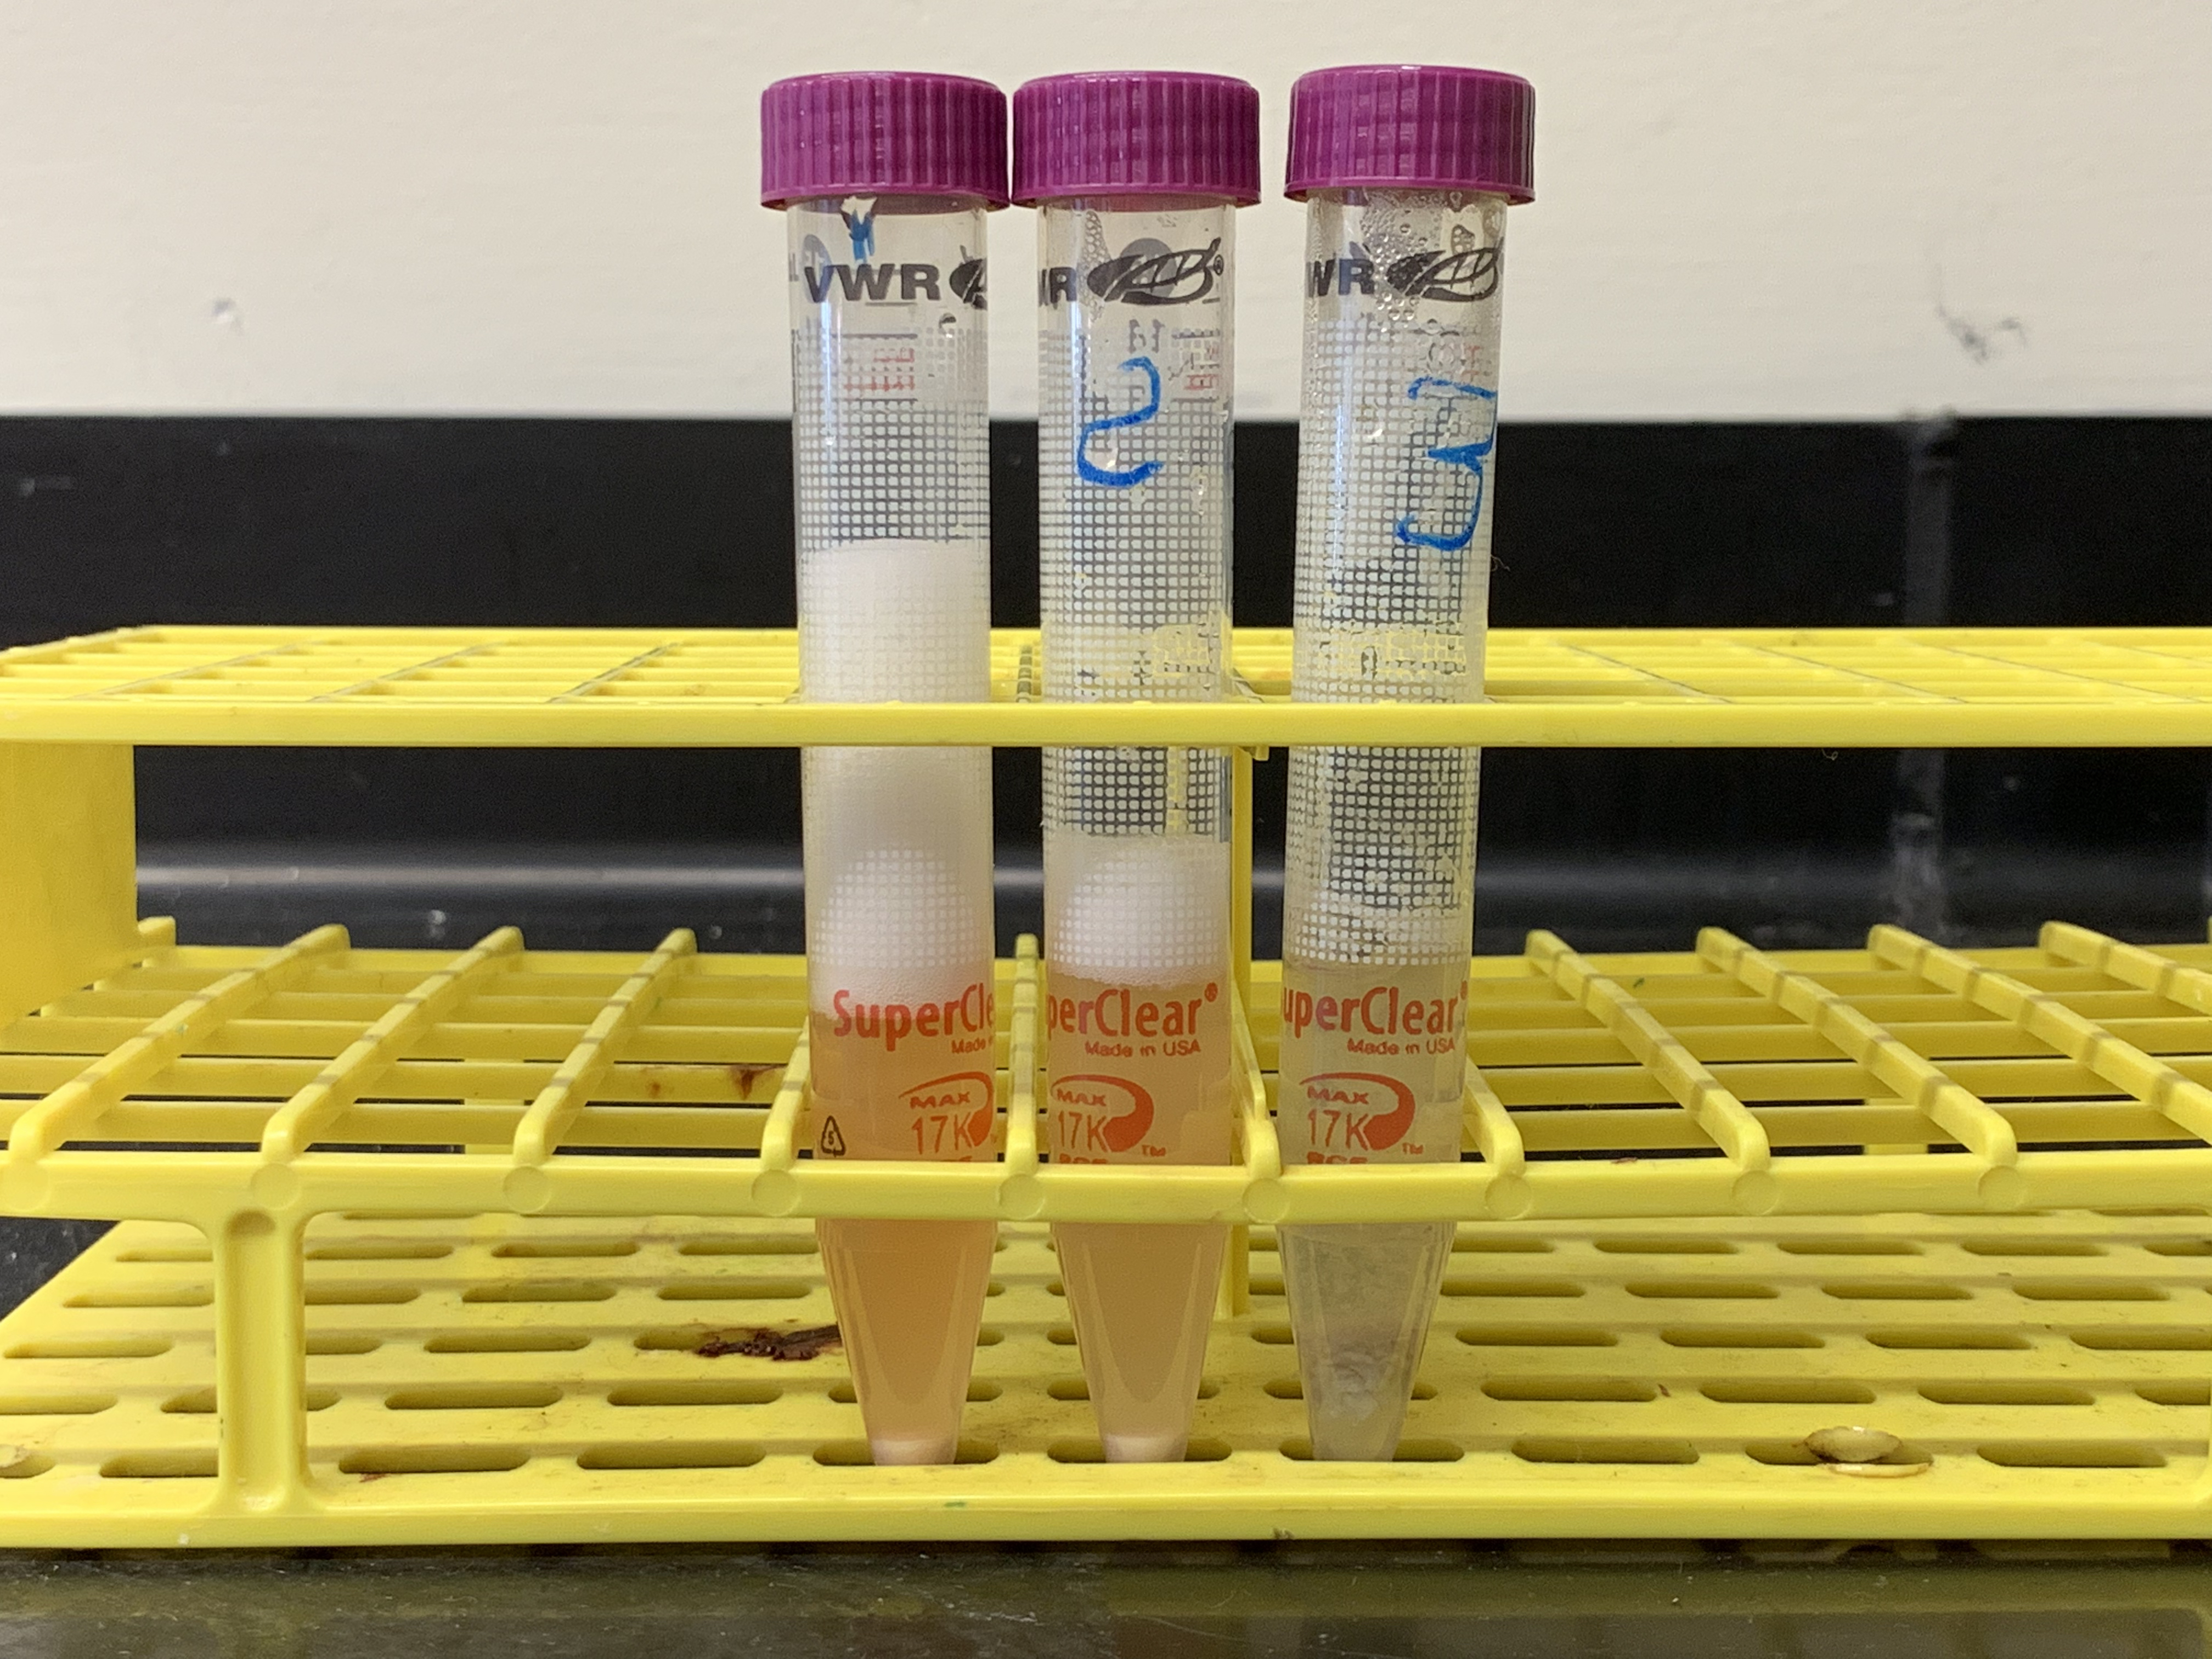 Results from experiment 2. The tubes in the picture correspond from left to right to tubes 1 to 3 in table 8.2. What conclusions can you draw from the results of this experiment as shown in this figure?